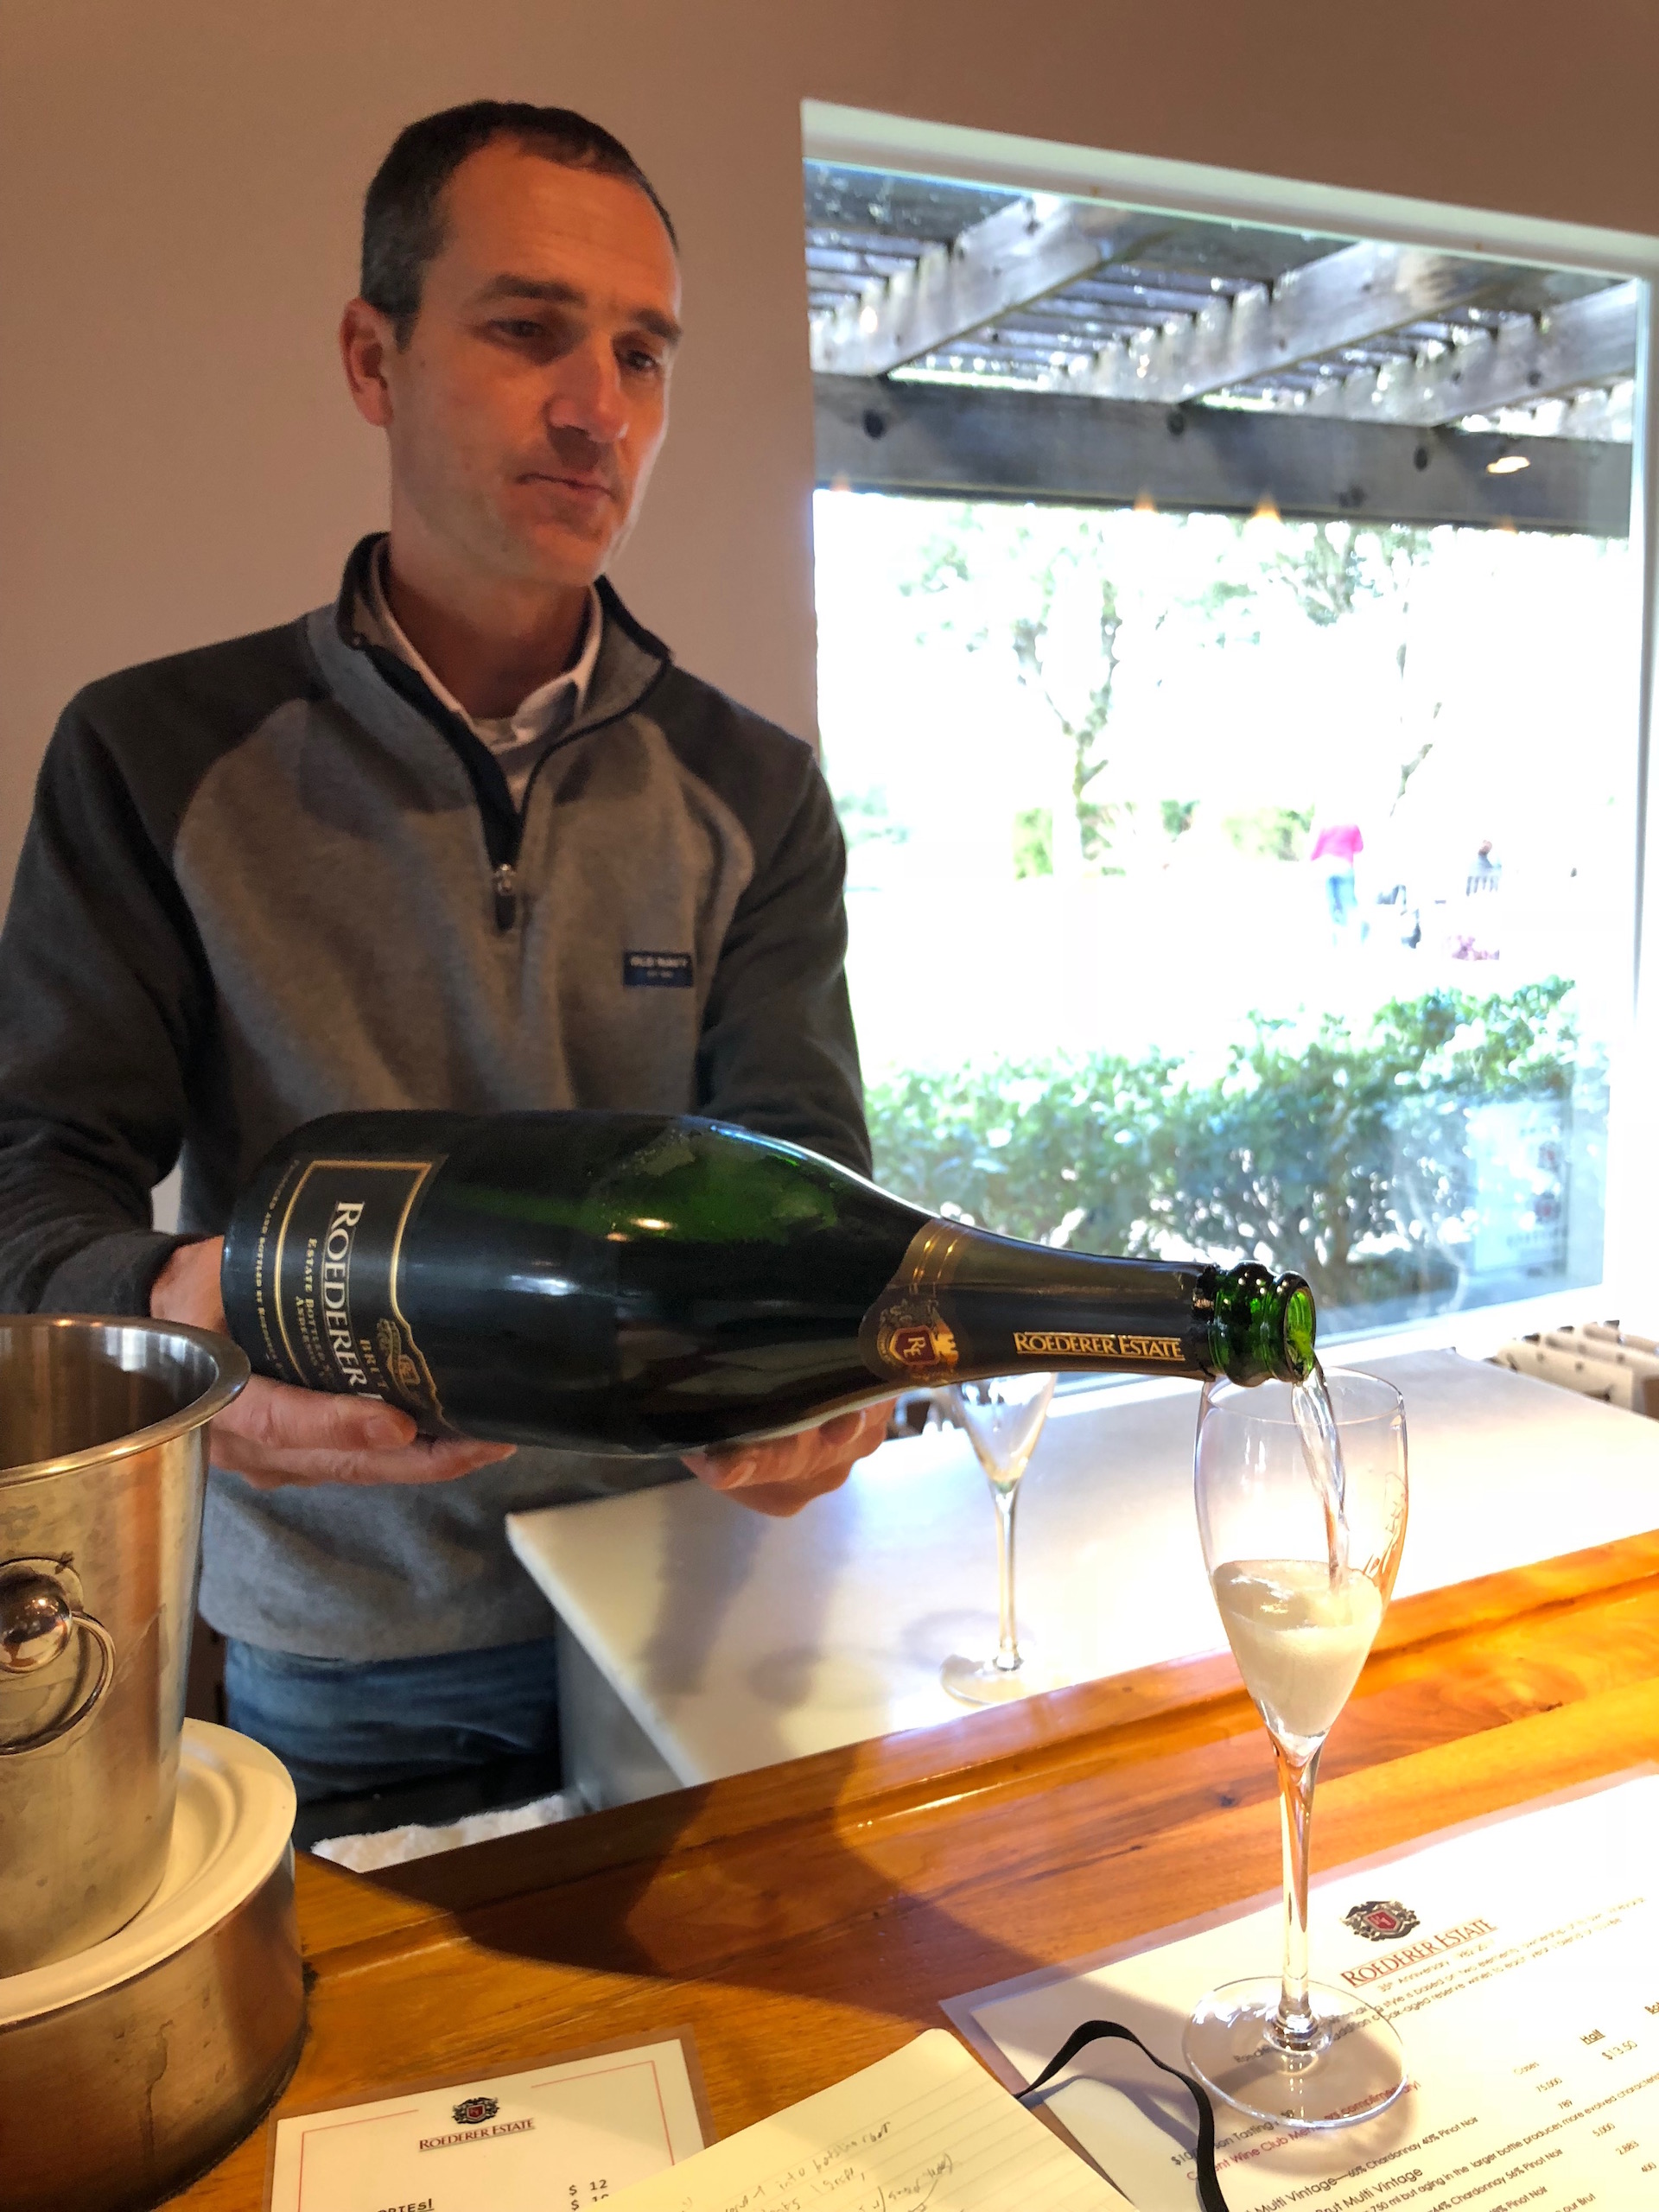 Roederer Estate’s winemaker Arnaud Weyrich pours some of the superb Anderson Valley sparkling wine that the winery is known for